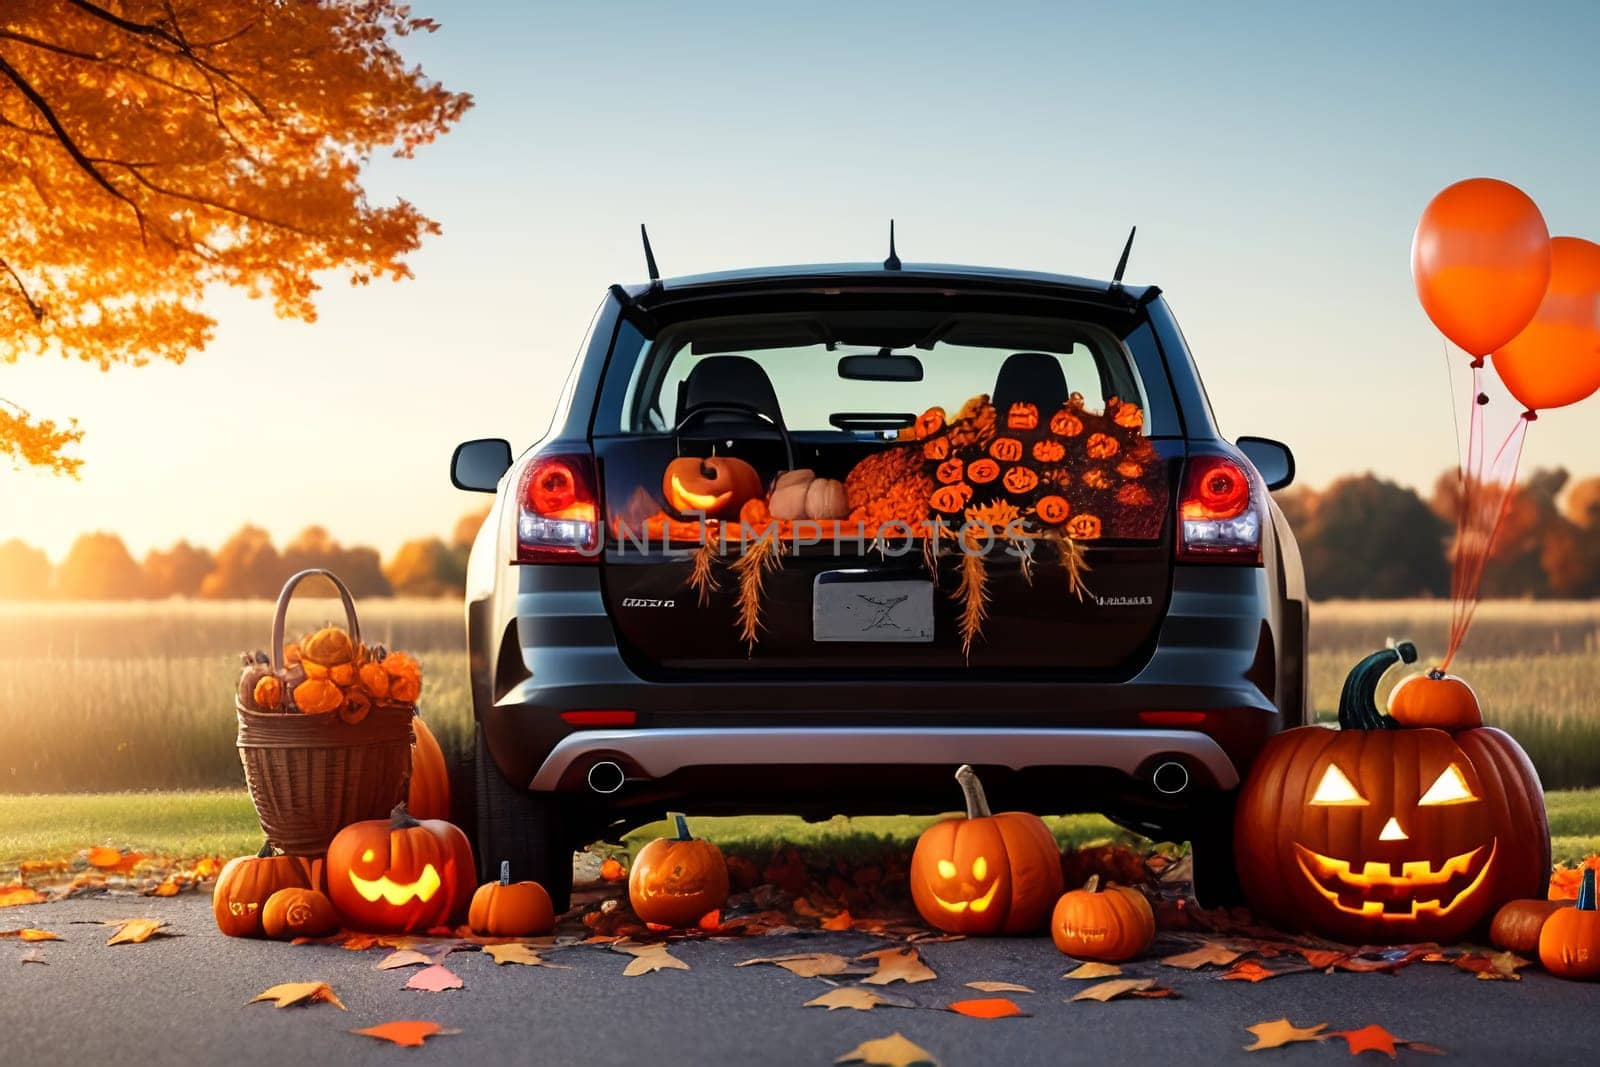 A large car decorated for Halloween with cobwebs, pumpkins, orange balloons and sweets. The concept of a creative outdoor event in autumn by Annu1tochka